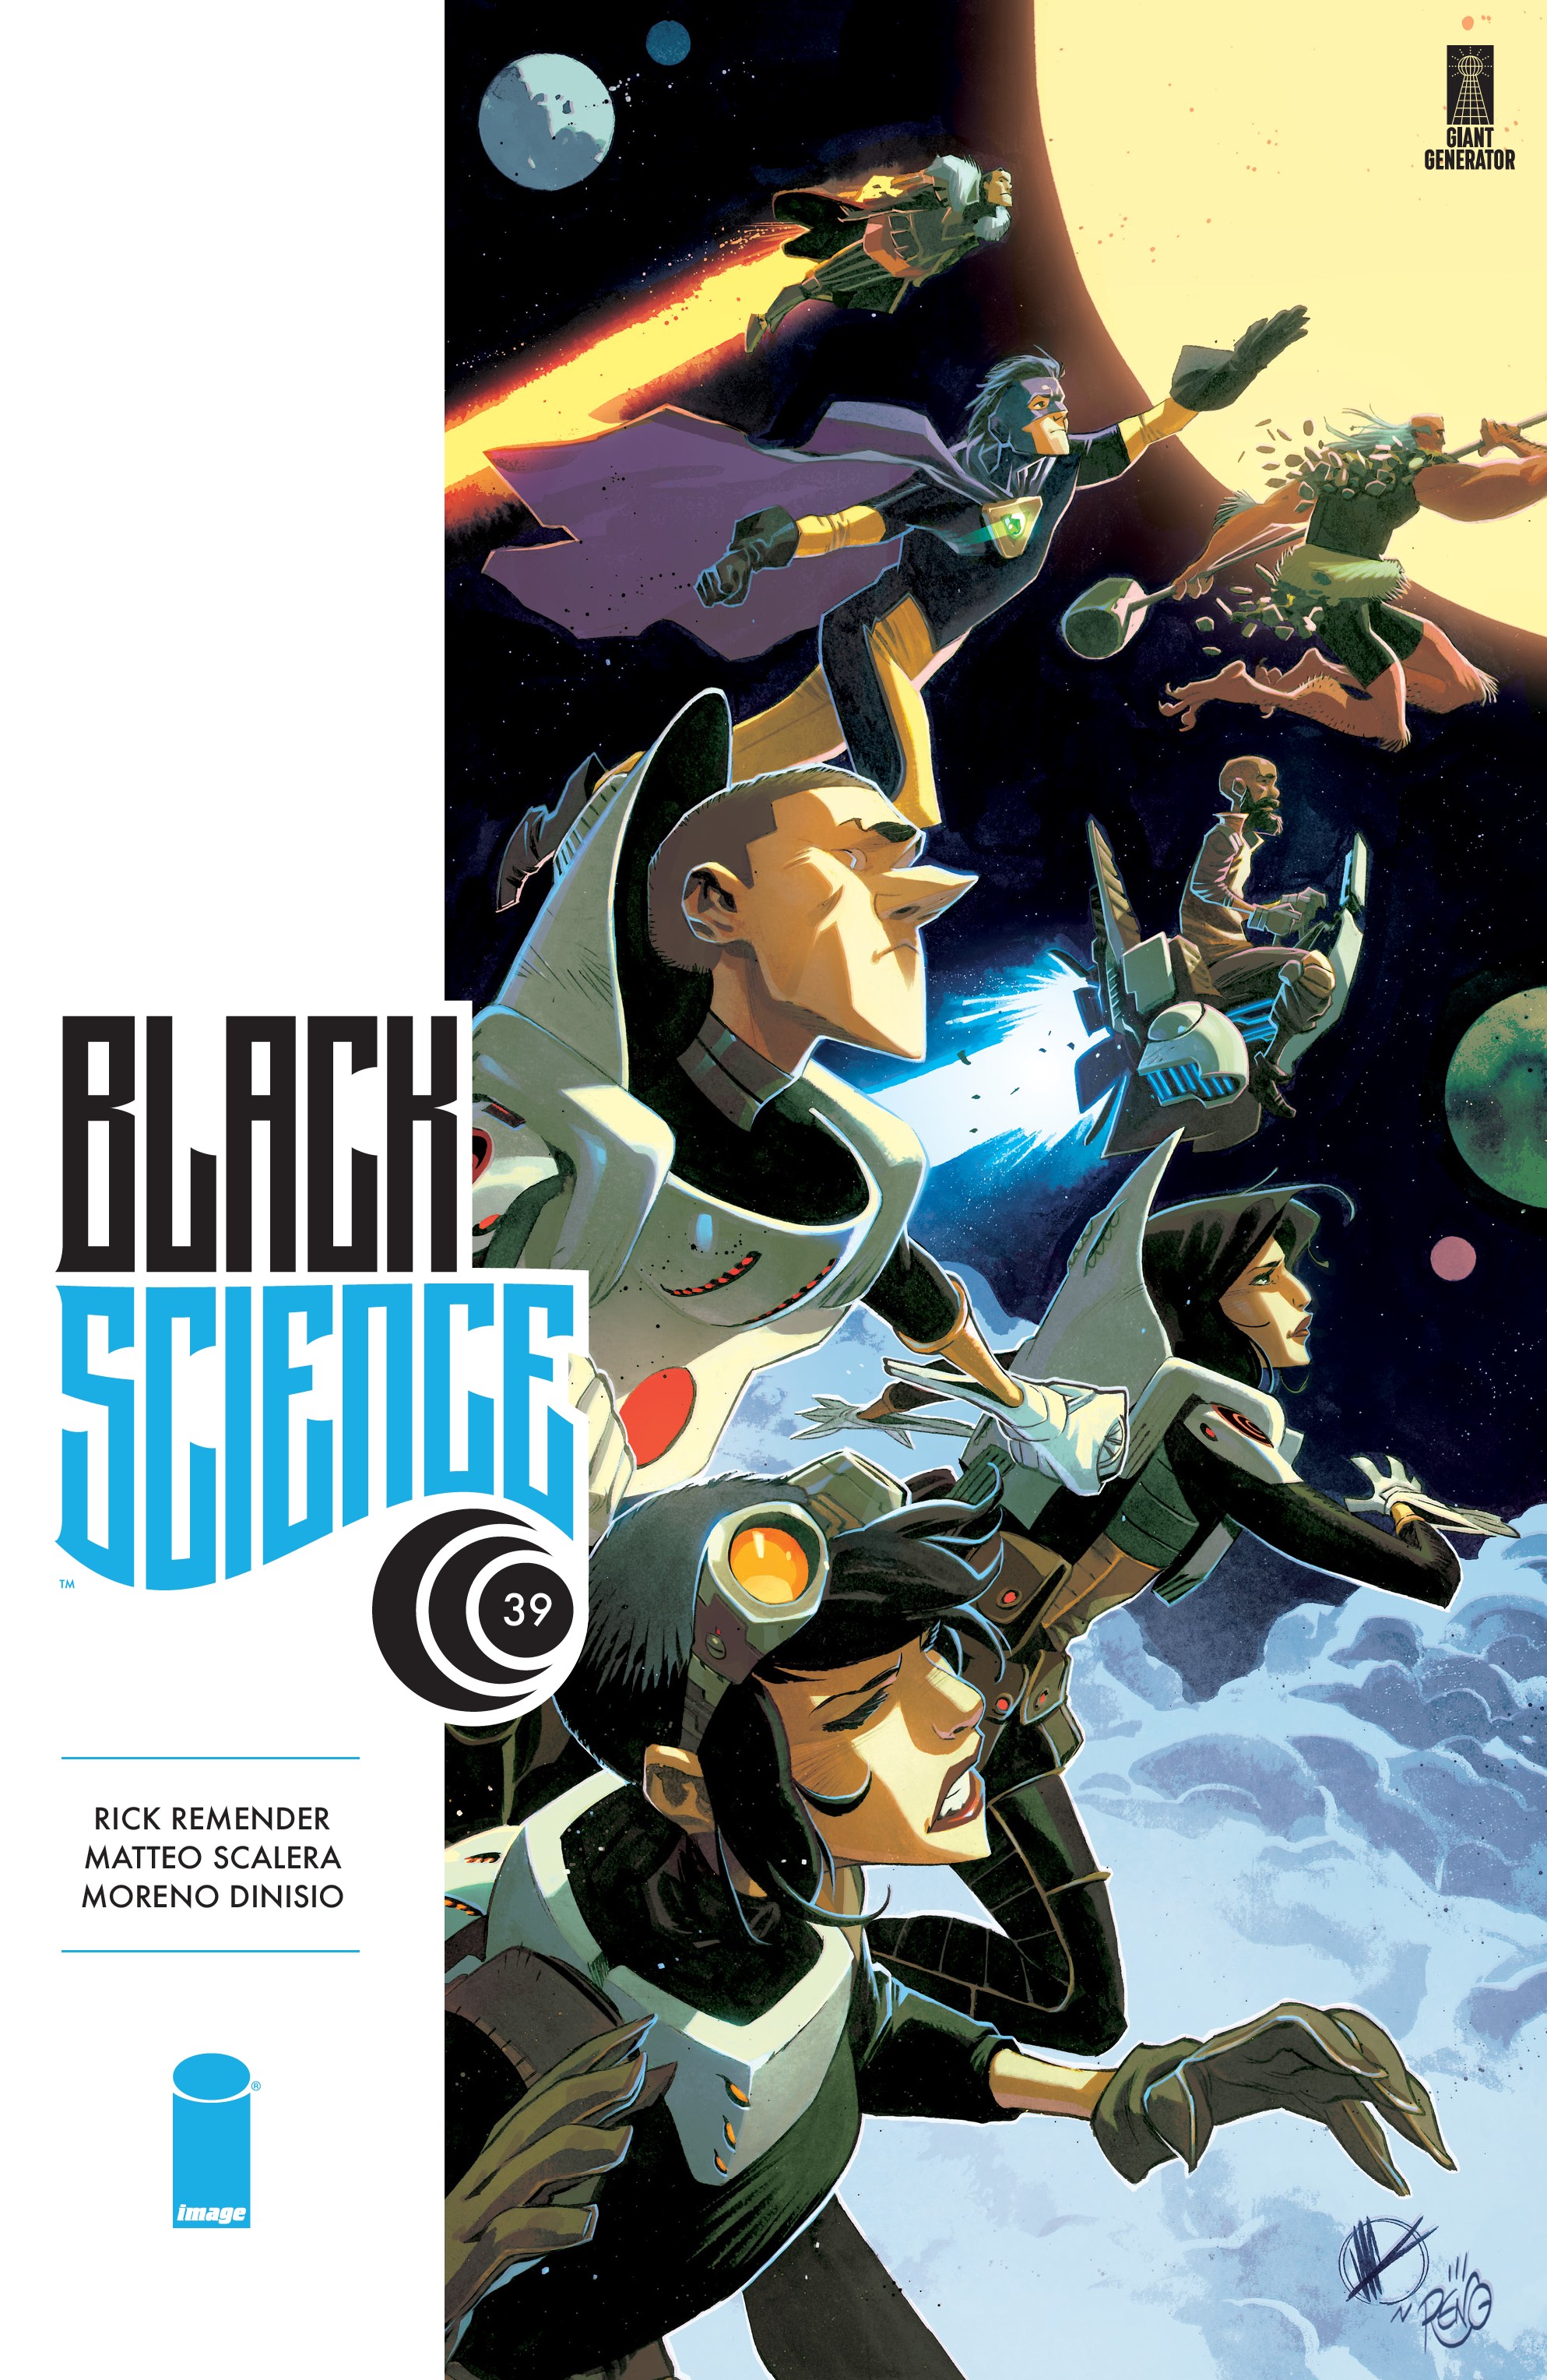 Read online Black Science comic -  Issue #39 - 1